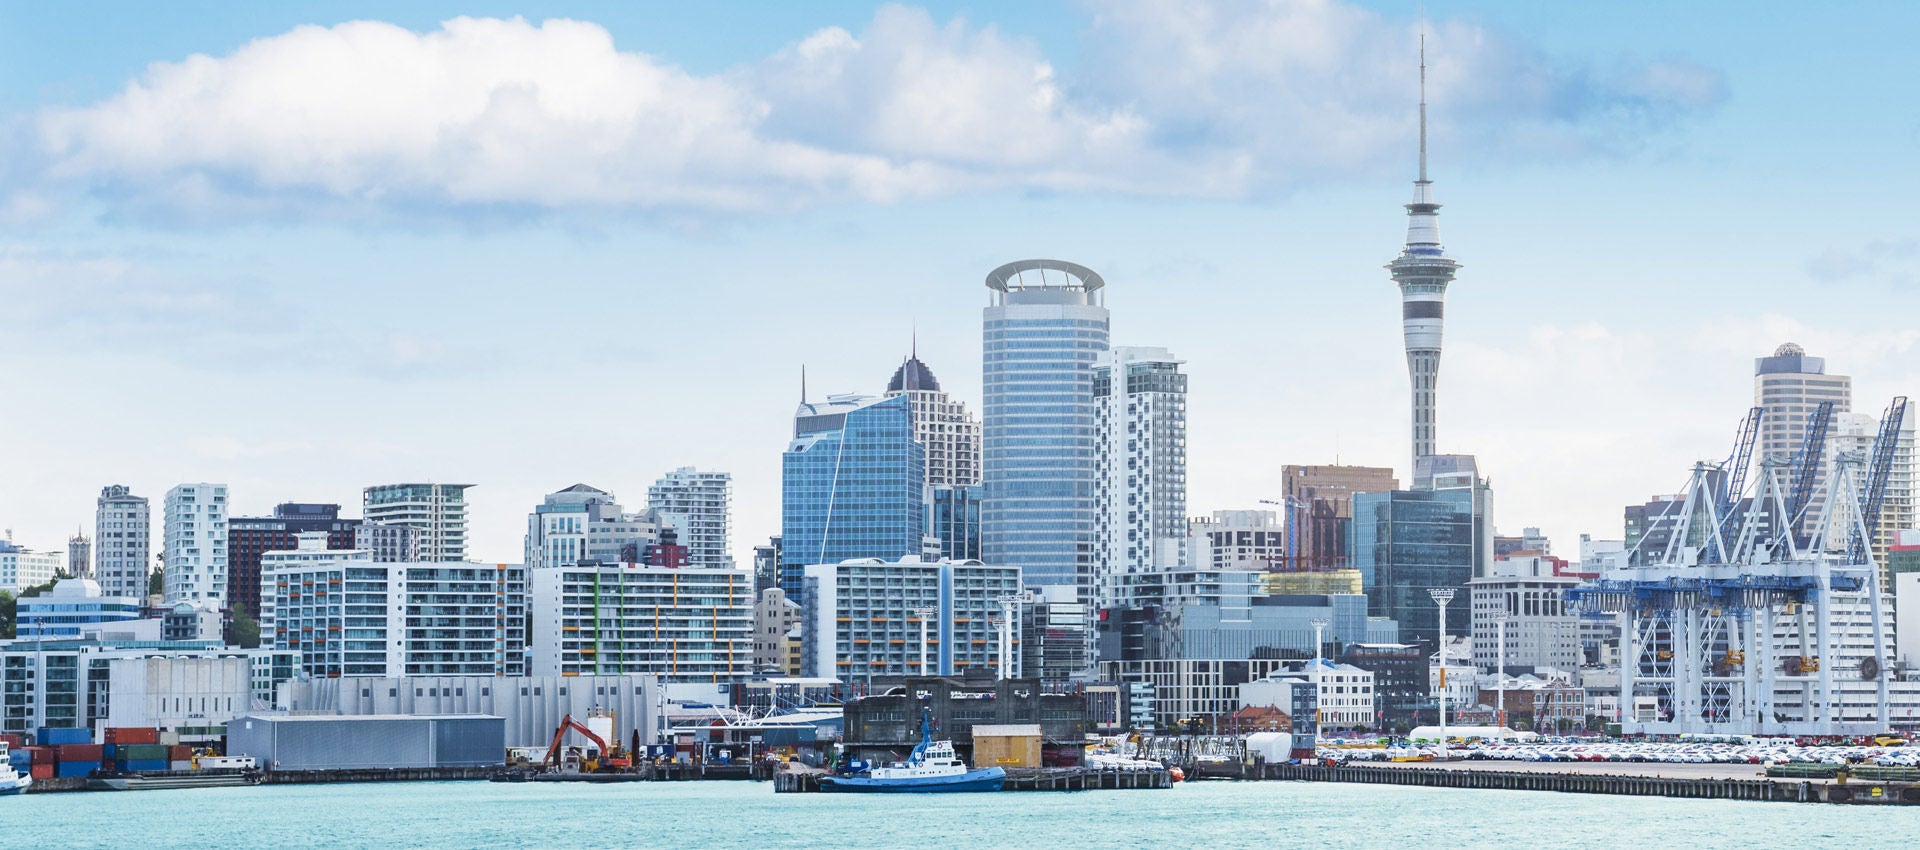 The Auckland skyline as seen on a pleasant day from the harbor. 